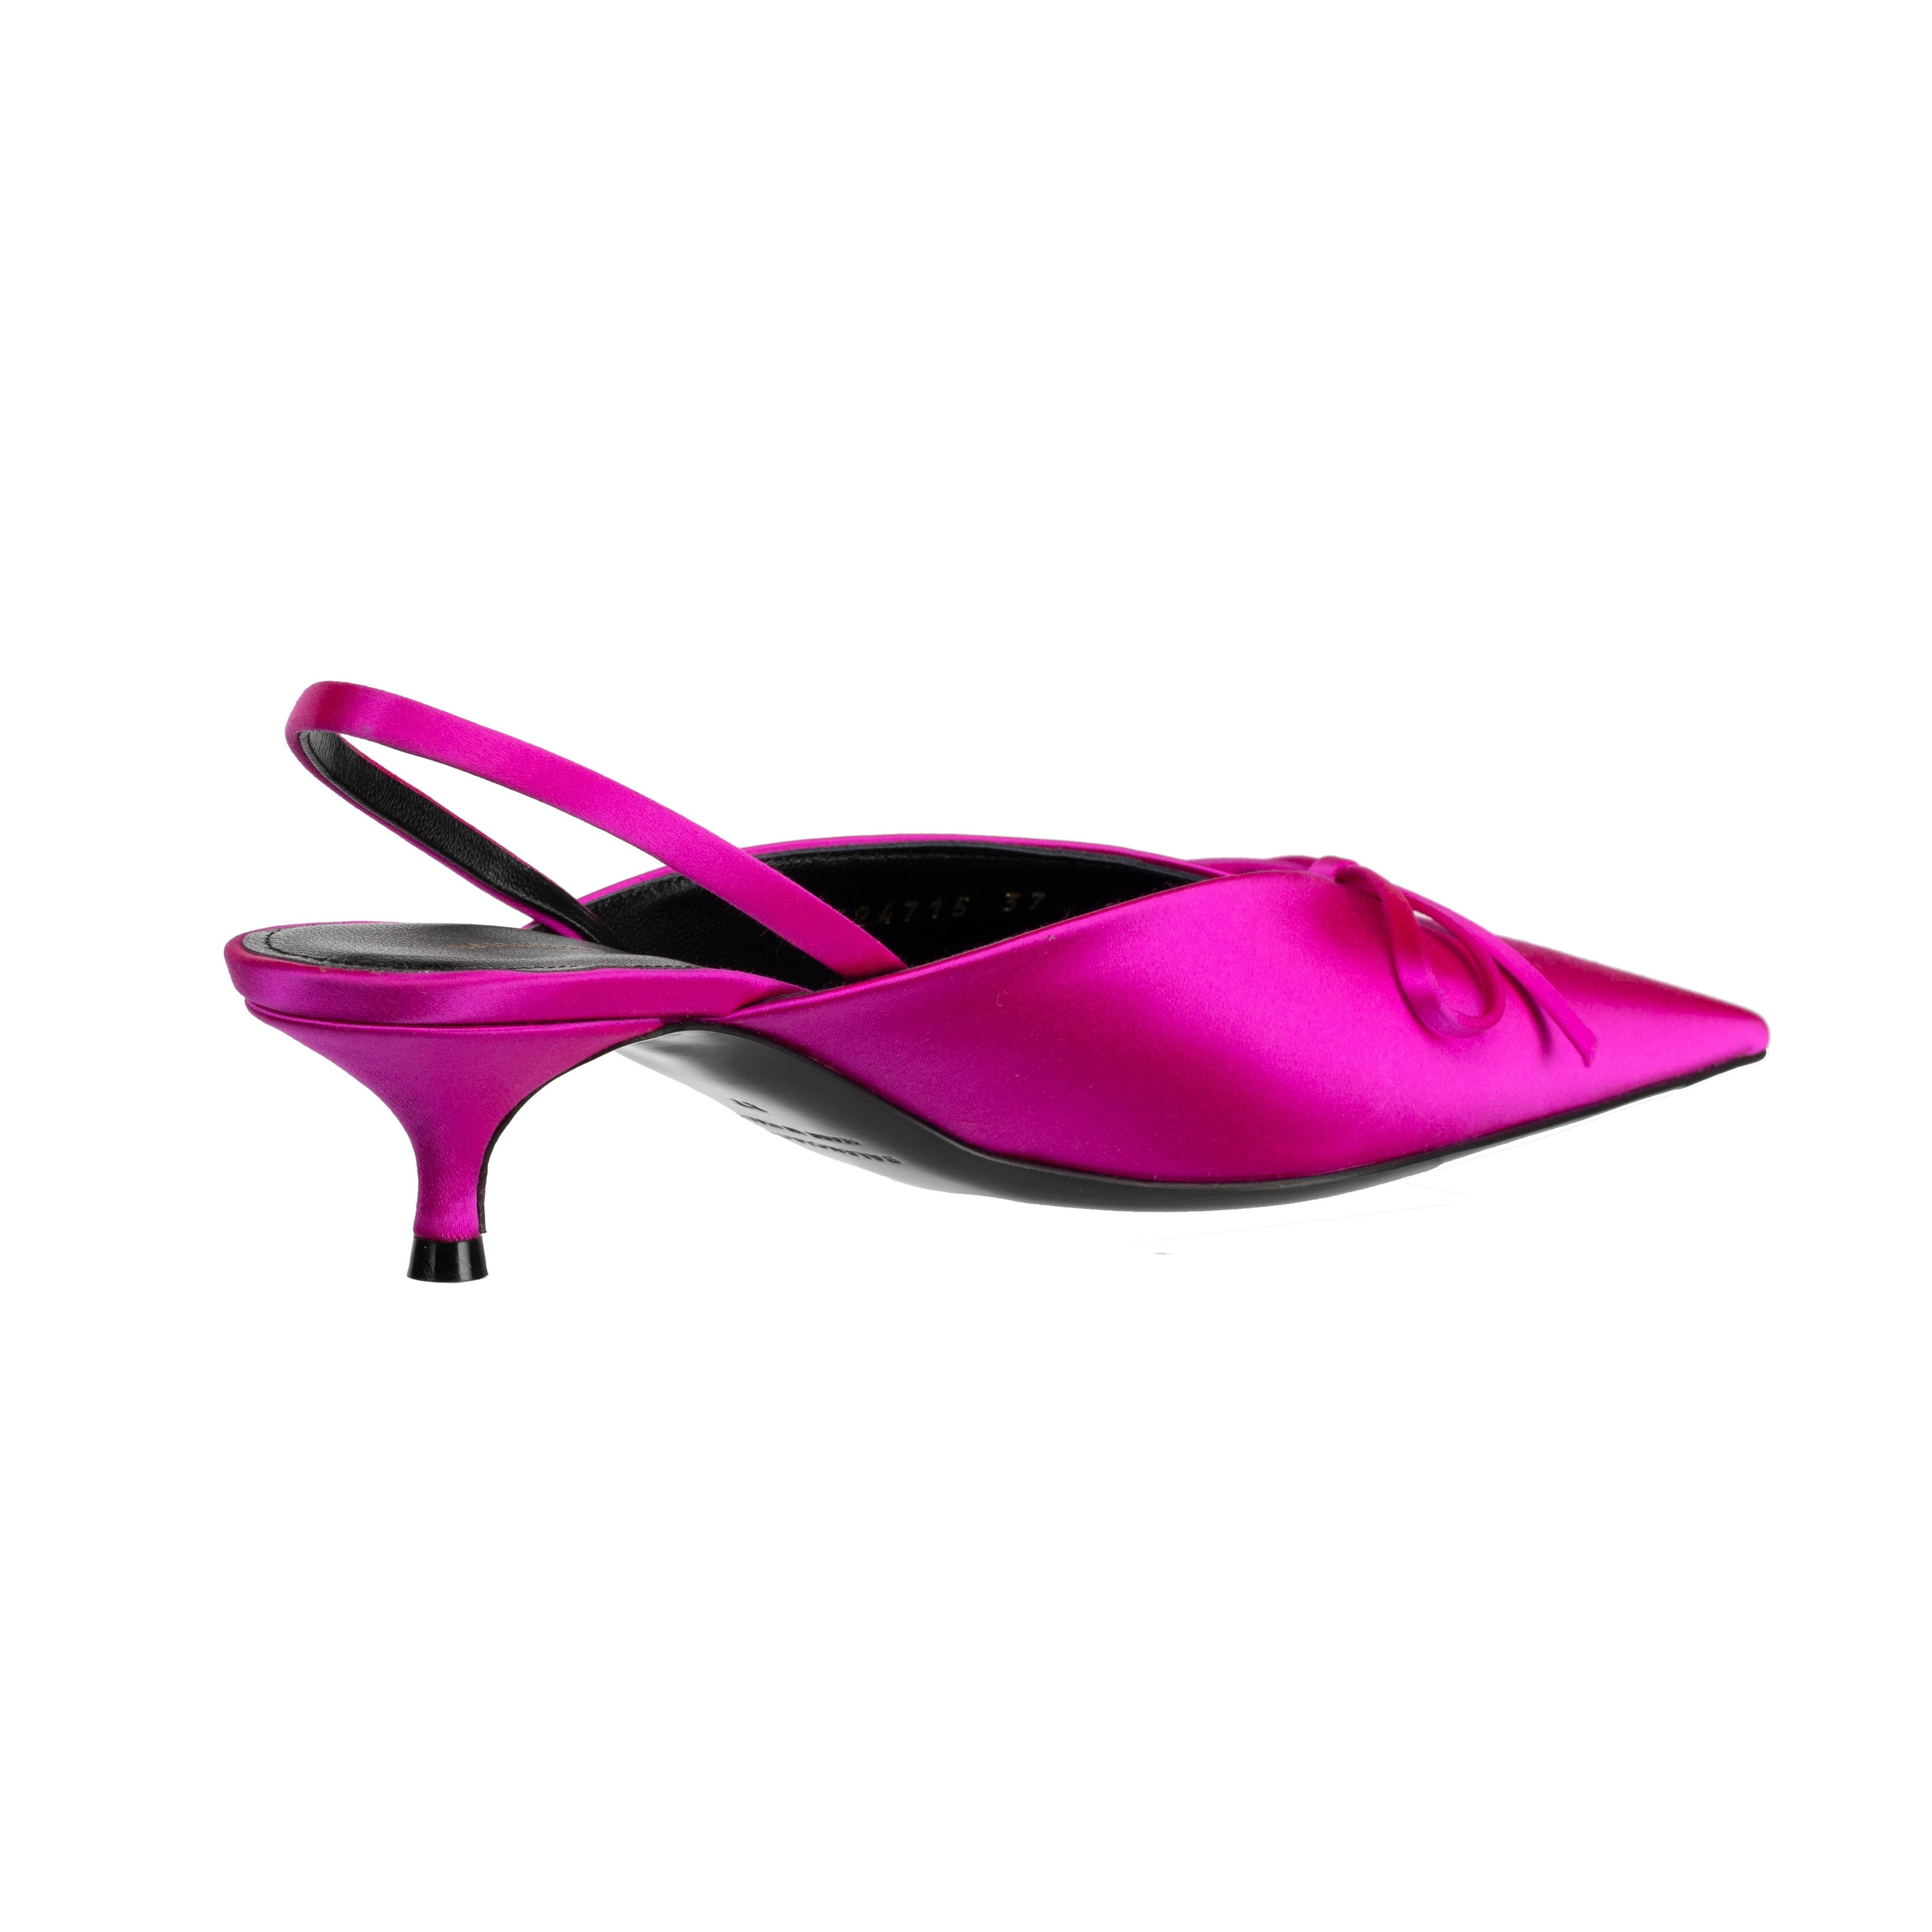 Brand:

Balenciaga

Product:

Knife Slingback Heels With Bow

Size:

37.5 Fr

Colour:

Rose Fuchsia

Heel:

4.5 Cm

Material:

Smooth Leather & Satin

Condition:

Pristine; Never Worn

Accompanied By:

Balenciaga Box, Two Balenciaga Dustbags, Tag &